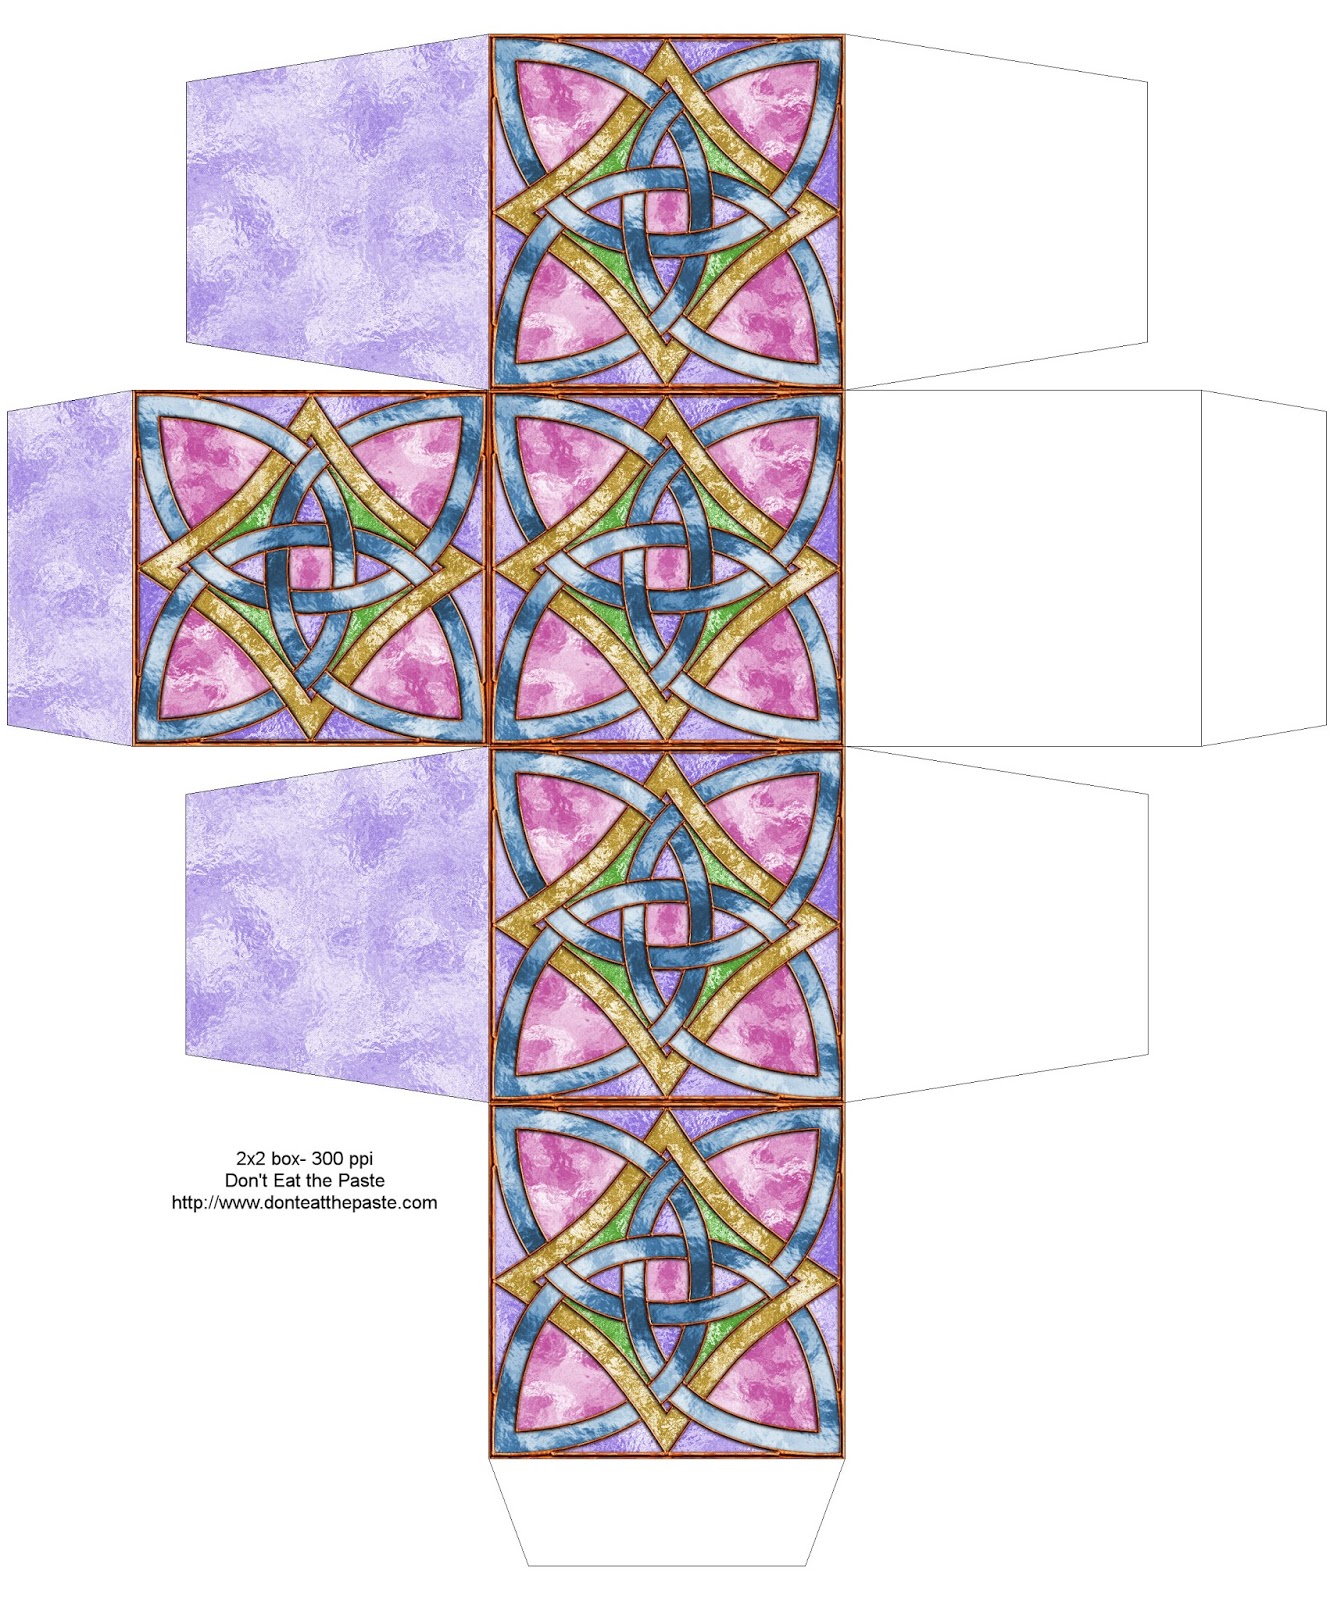 Stained glass effect knot box to print and make #papercrafts